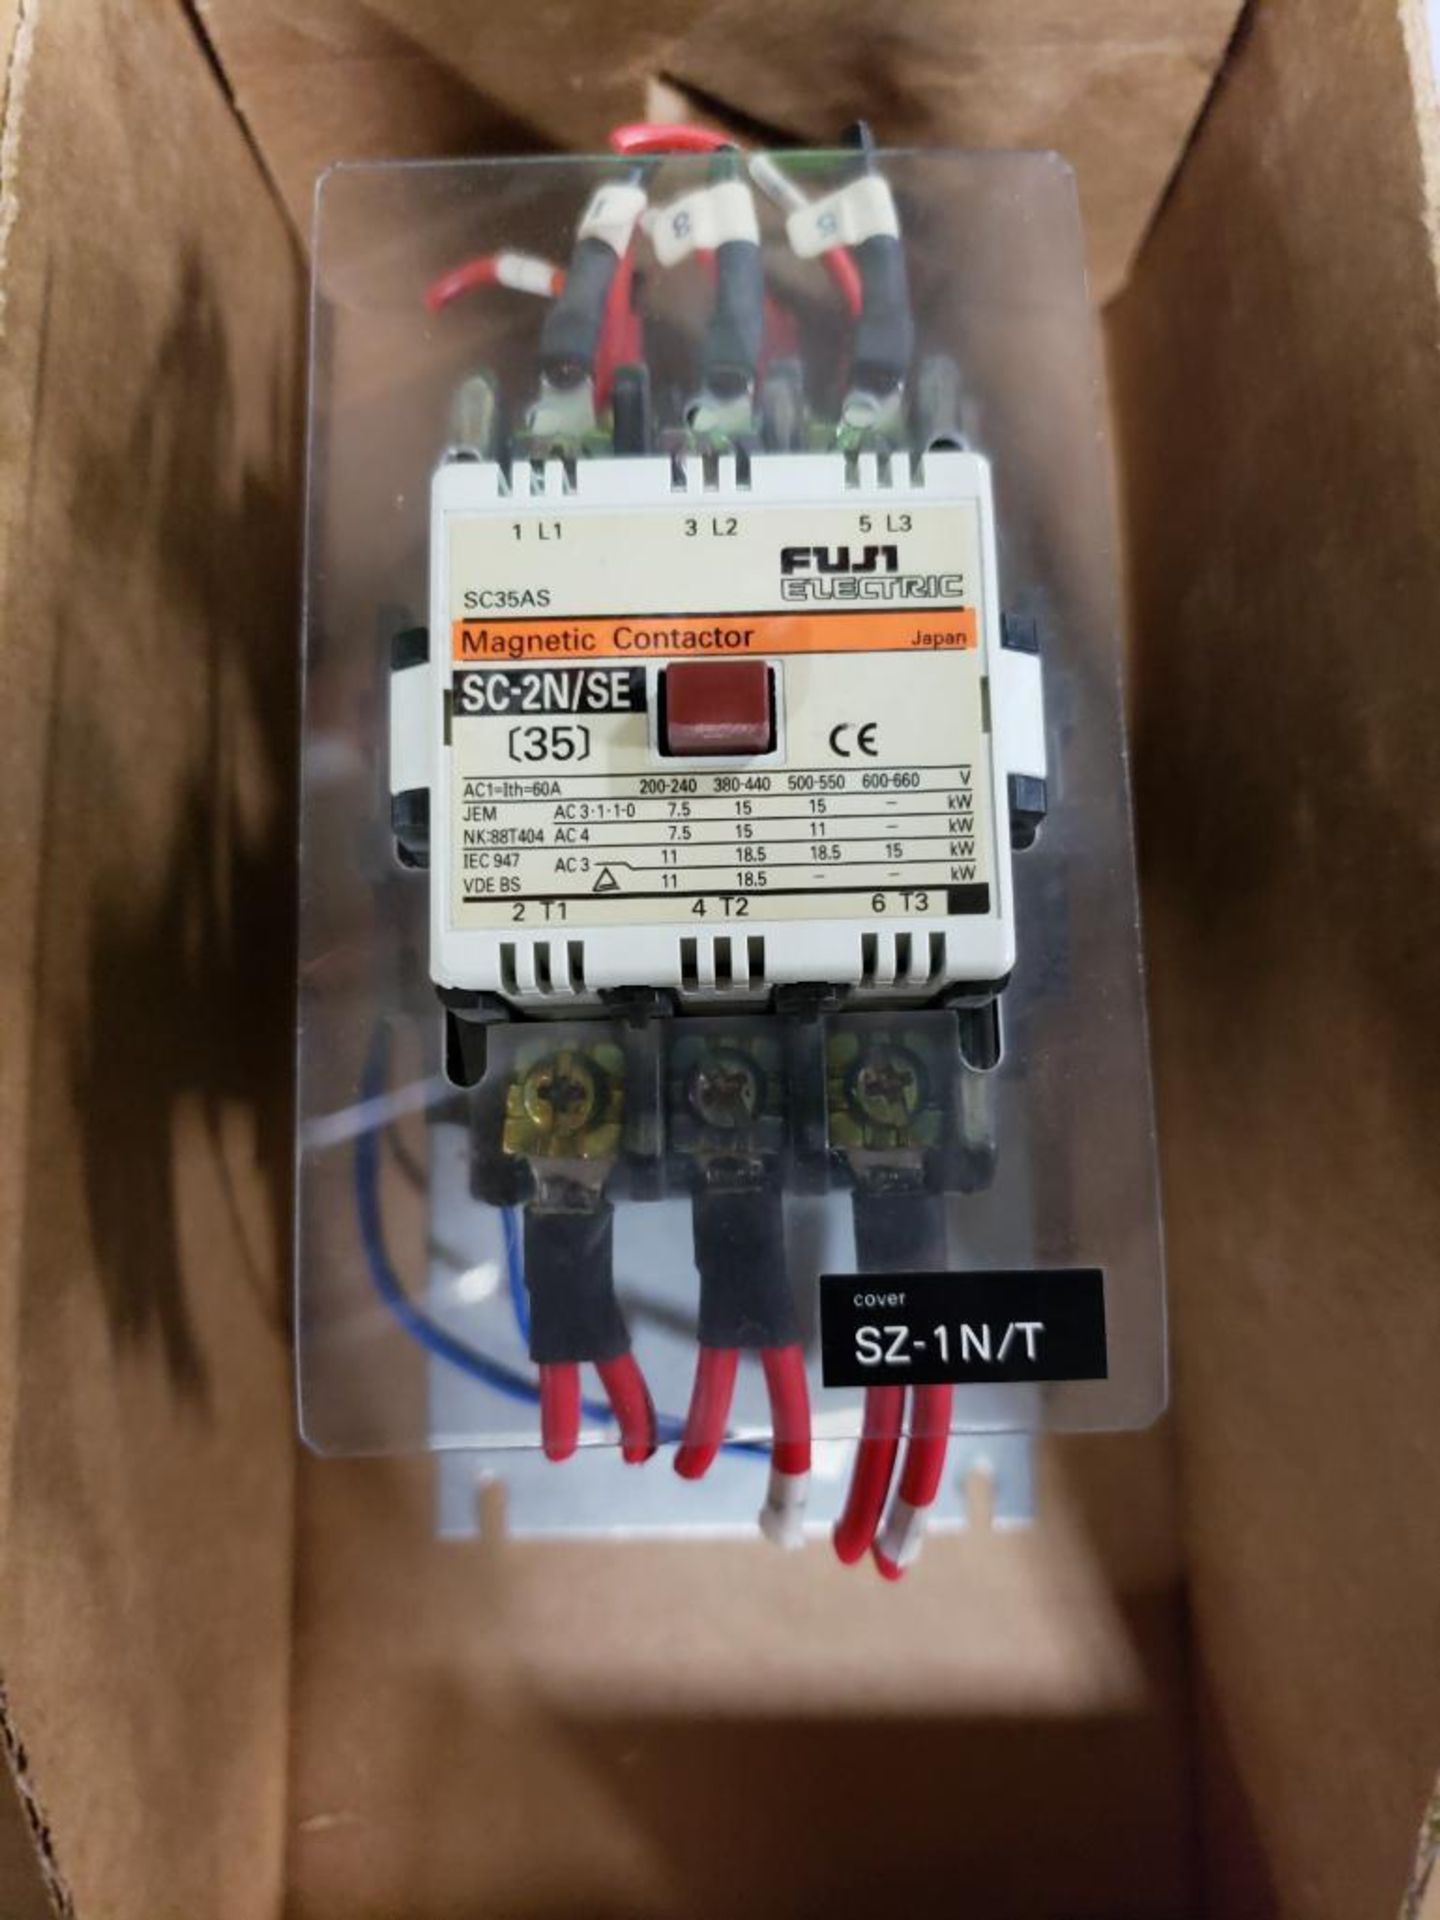 Fuji Electric SC-2N/SE Magnetic contactor. - Image 2 of 4